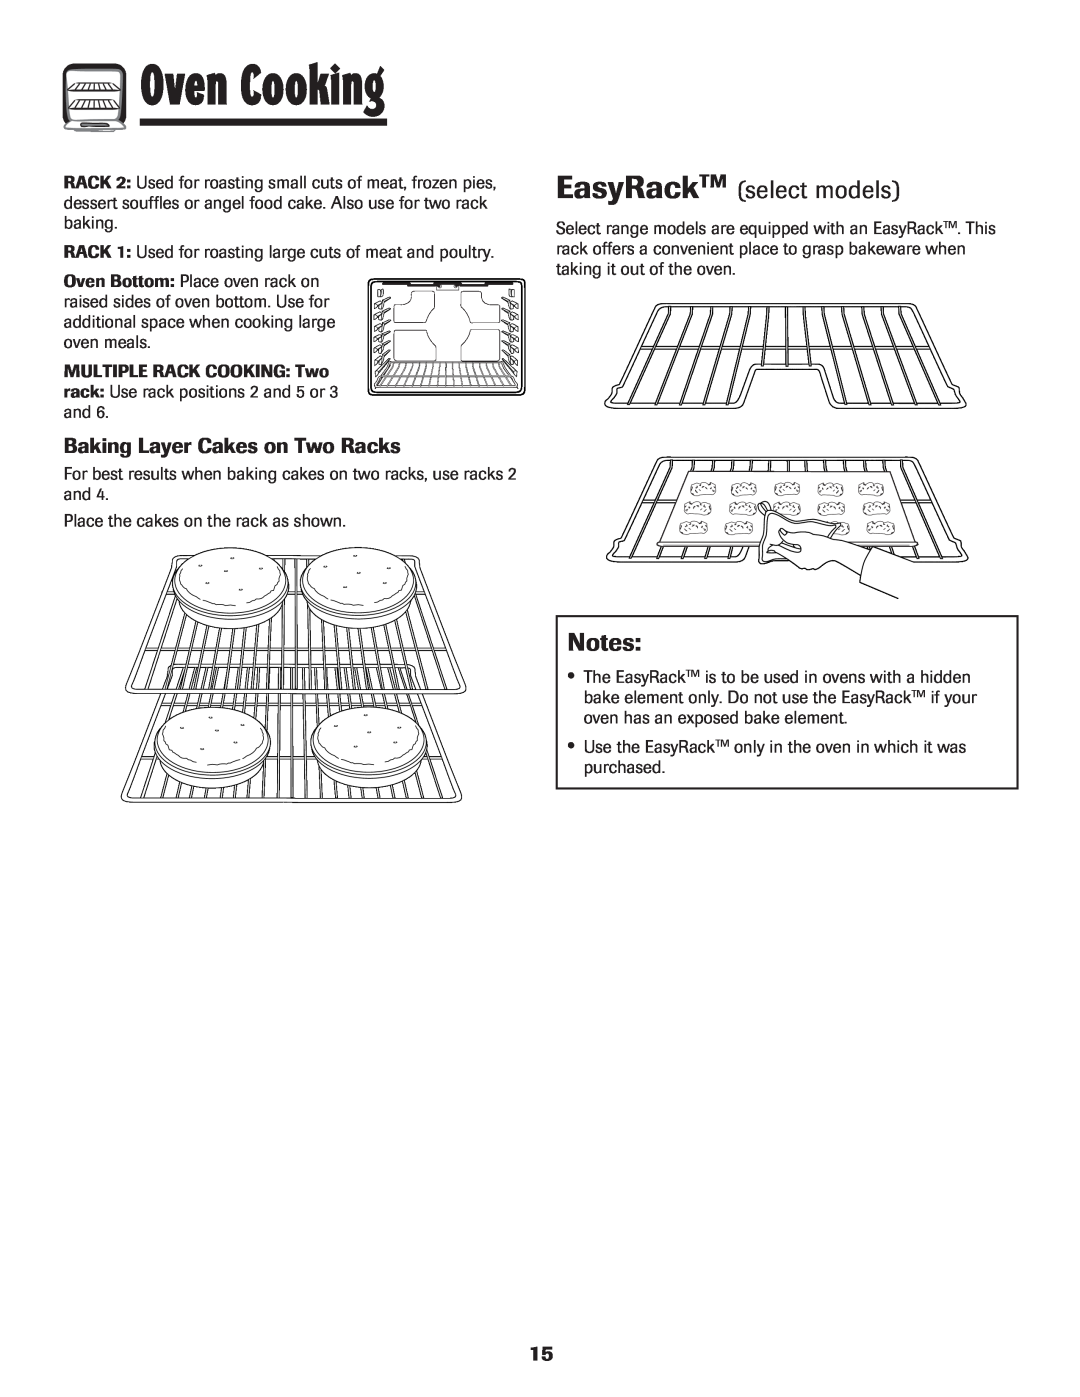 Amana 8113P598-60 manual EasyRackTM select models, Baking Layer Cakes on Two Racks, Oven Cooking 